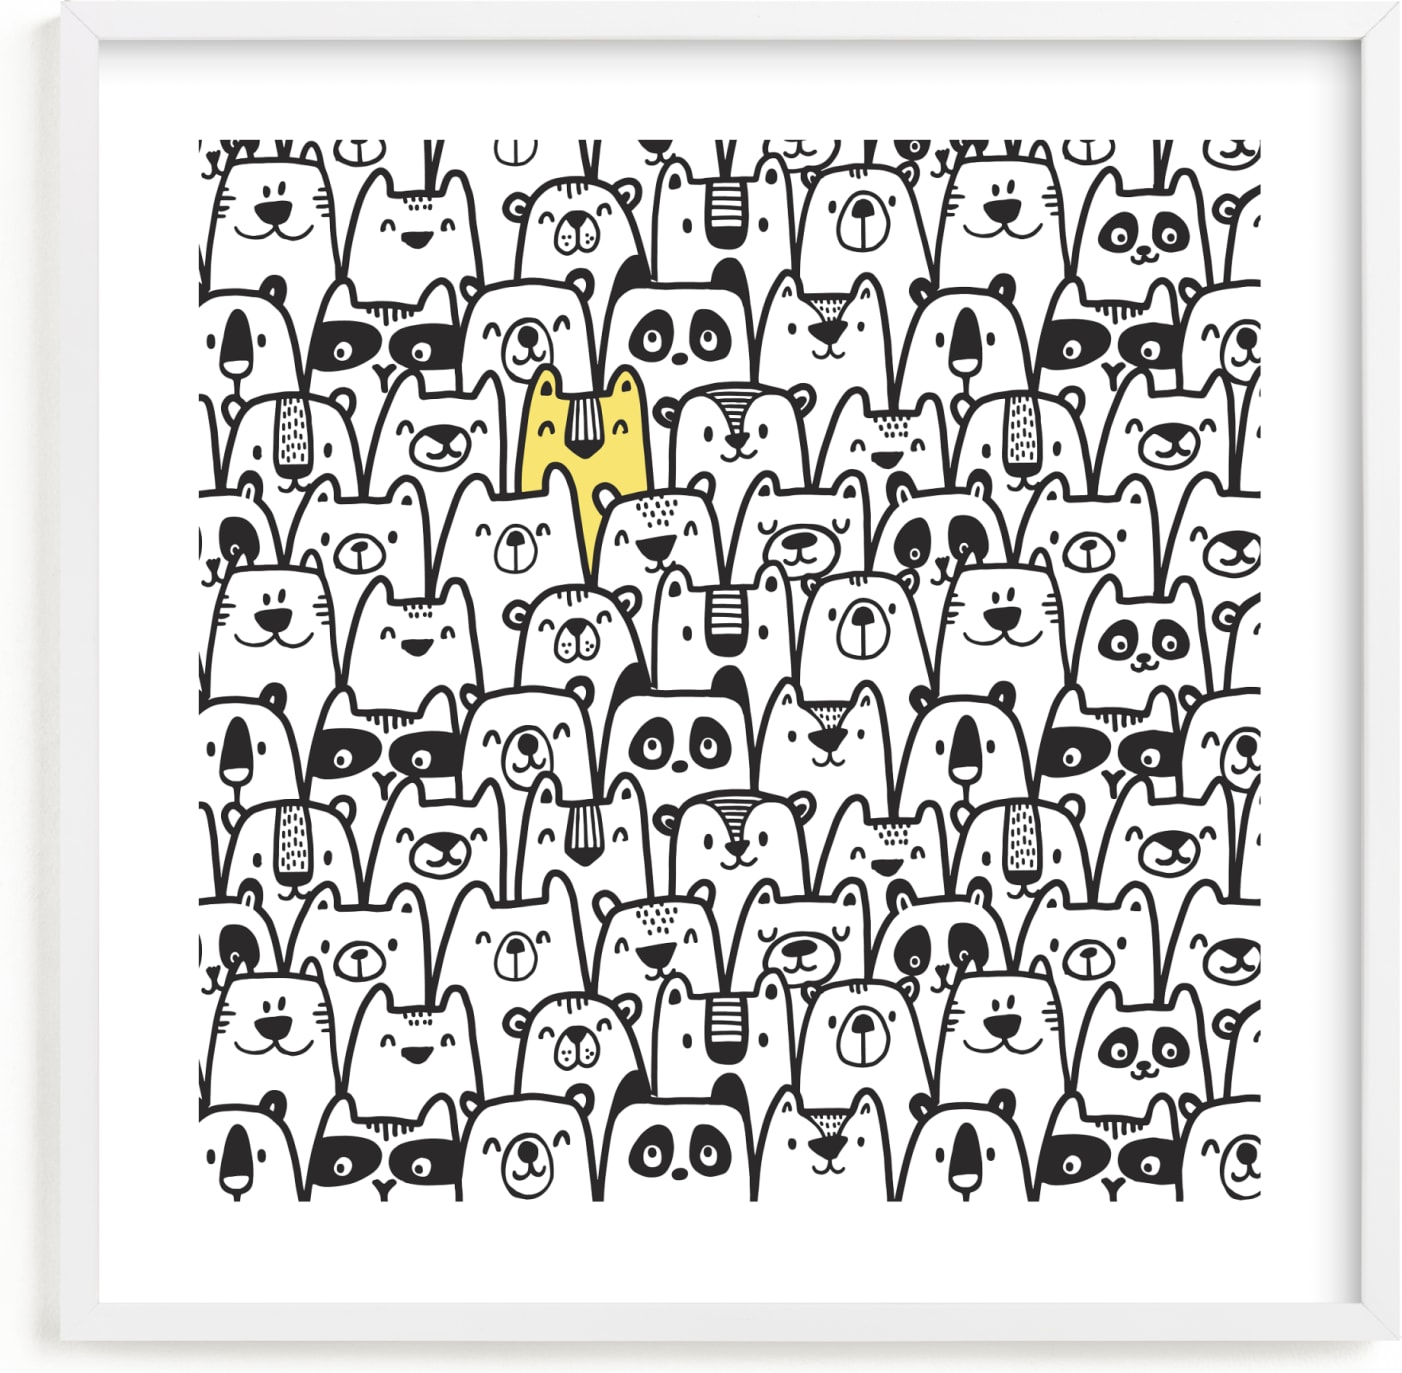 This is a black and white kids wall art by Gila von Meissner called All the Bears.